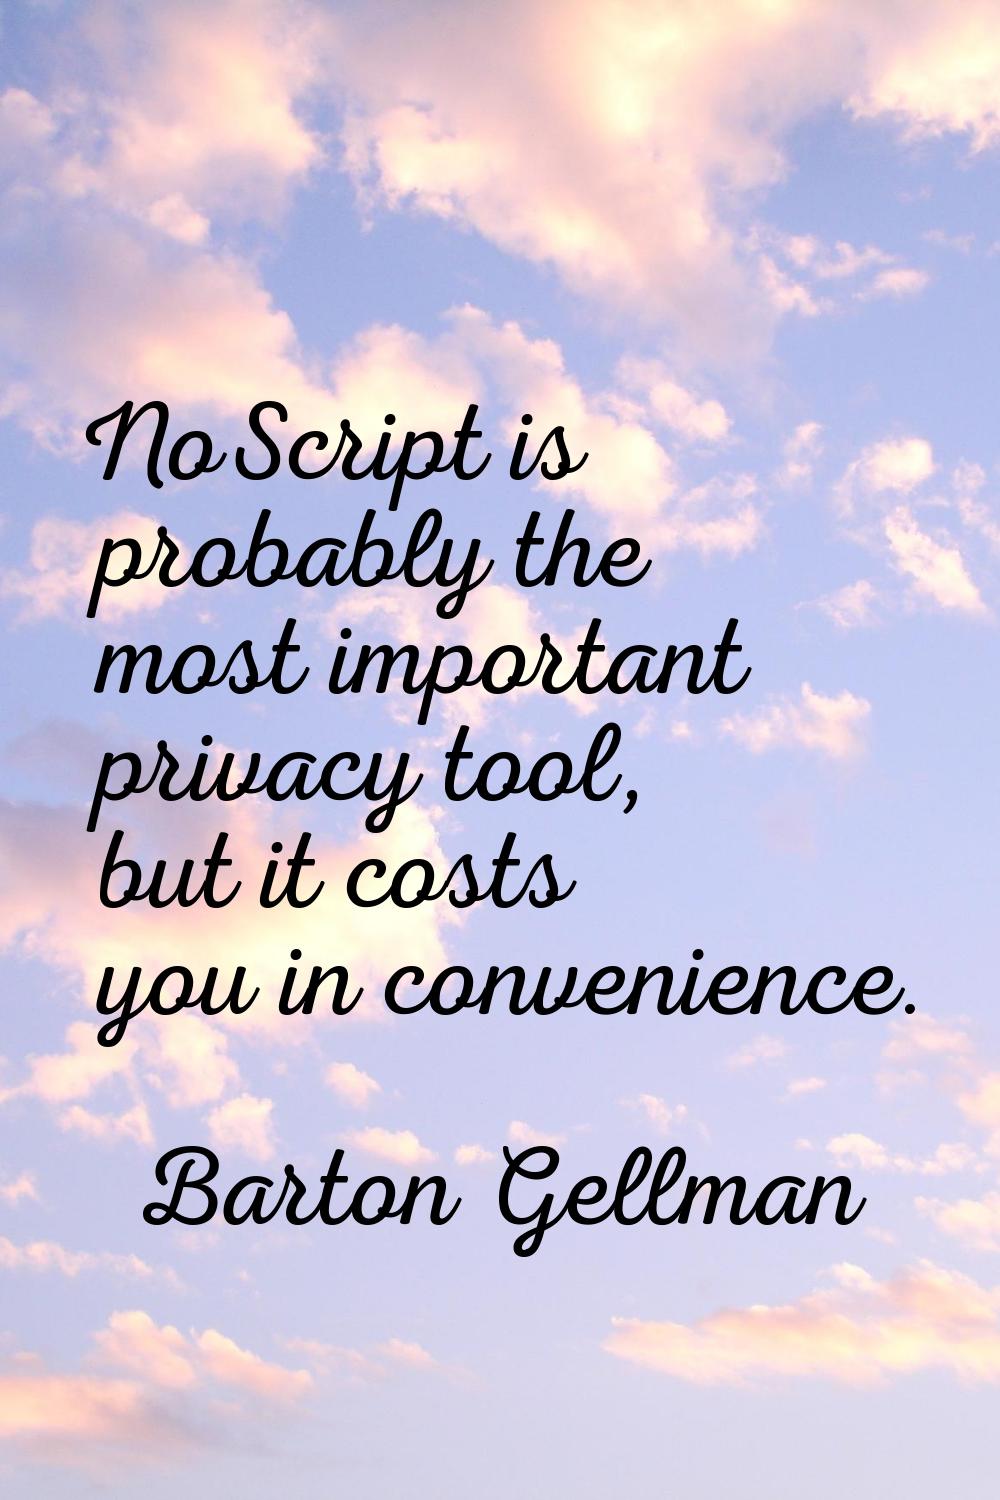 NoScript is probably the most important privacy tool, but it costs you in convenience.